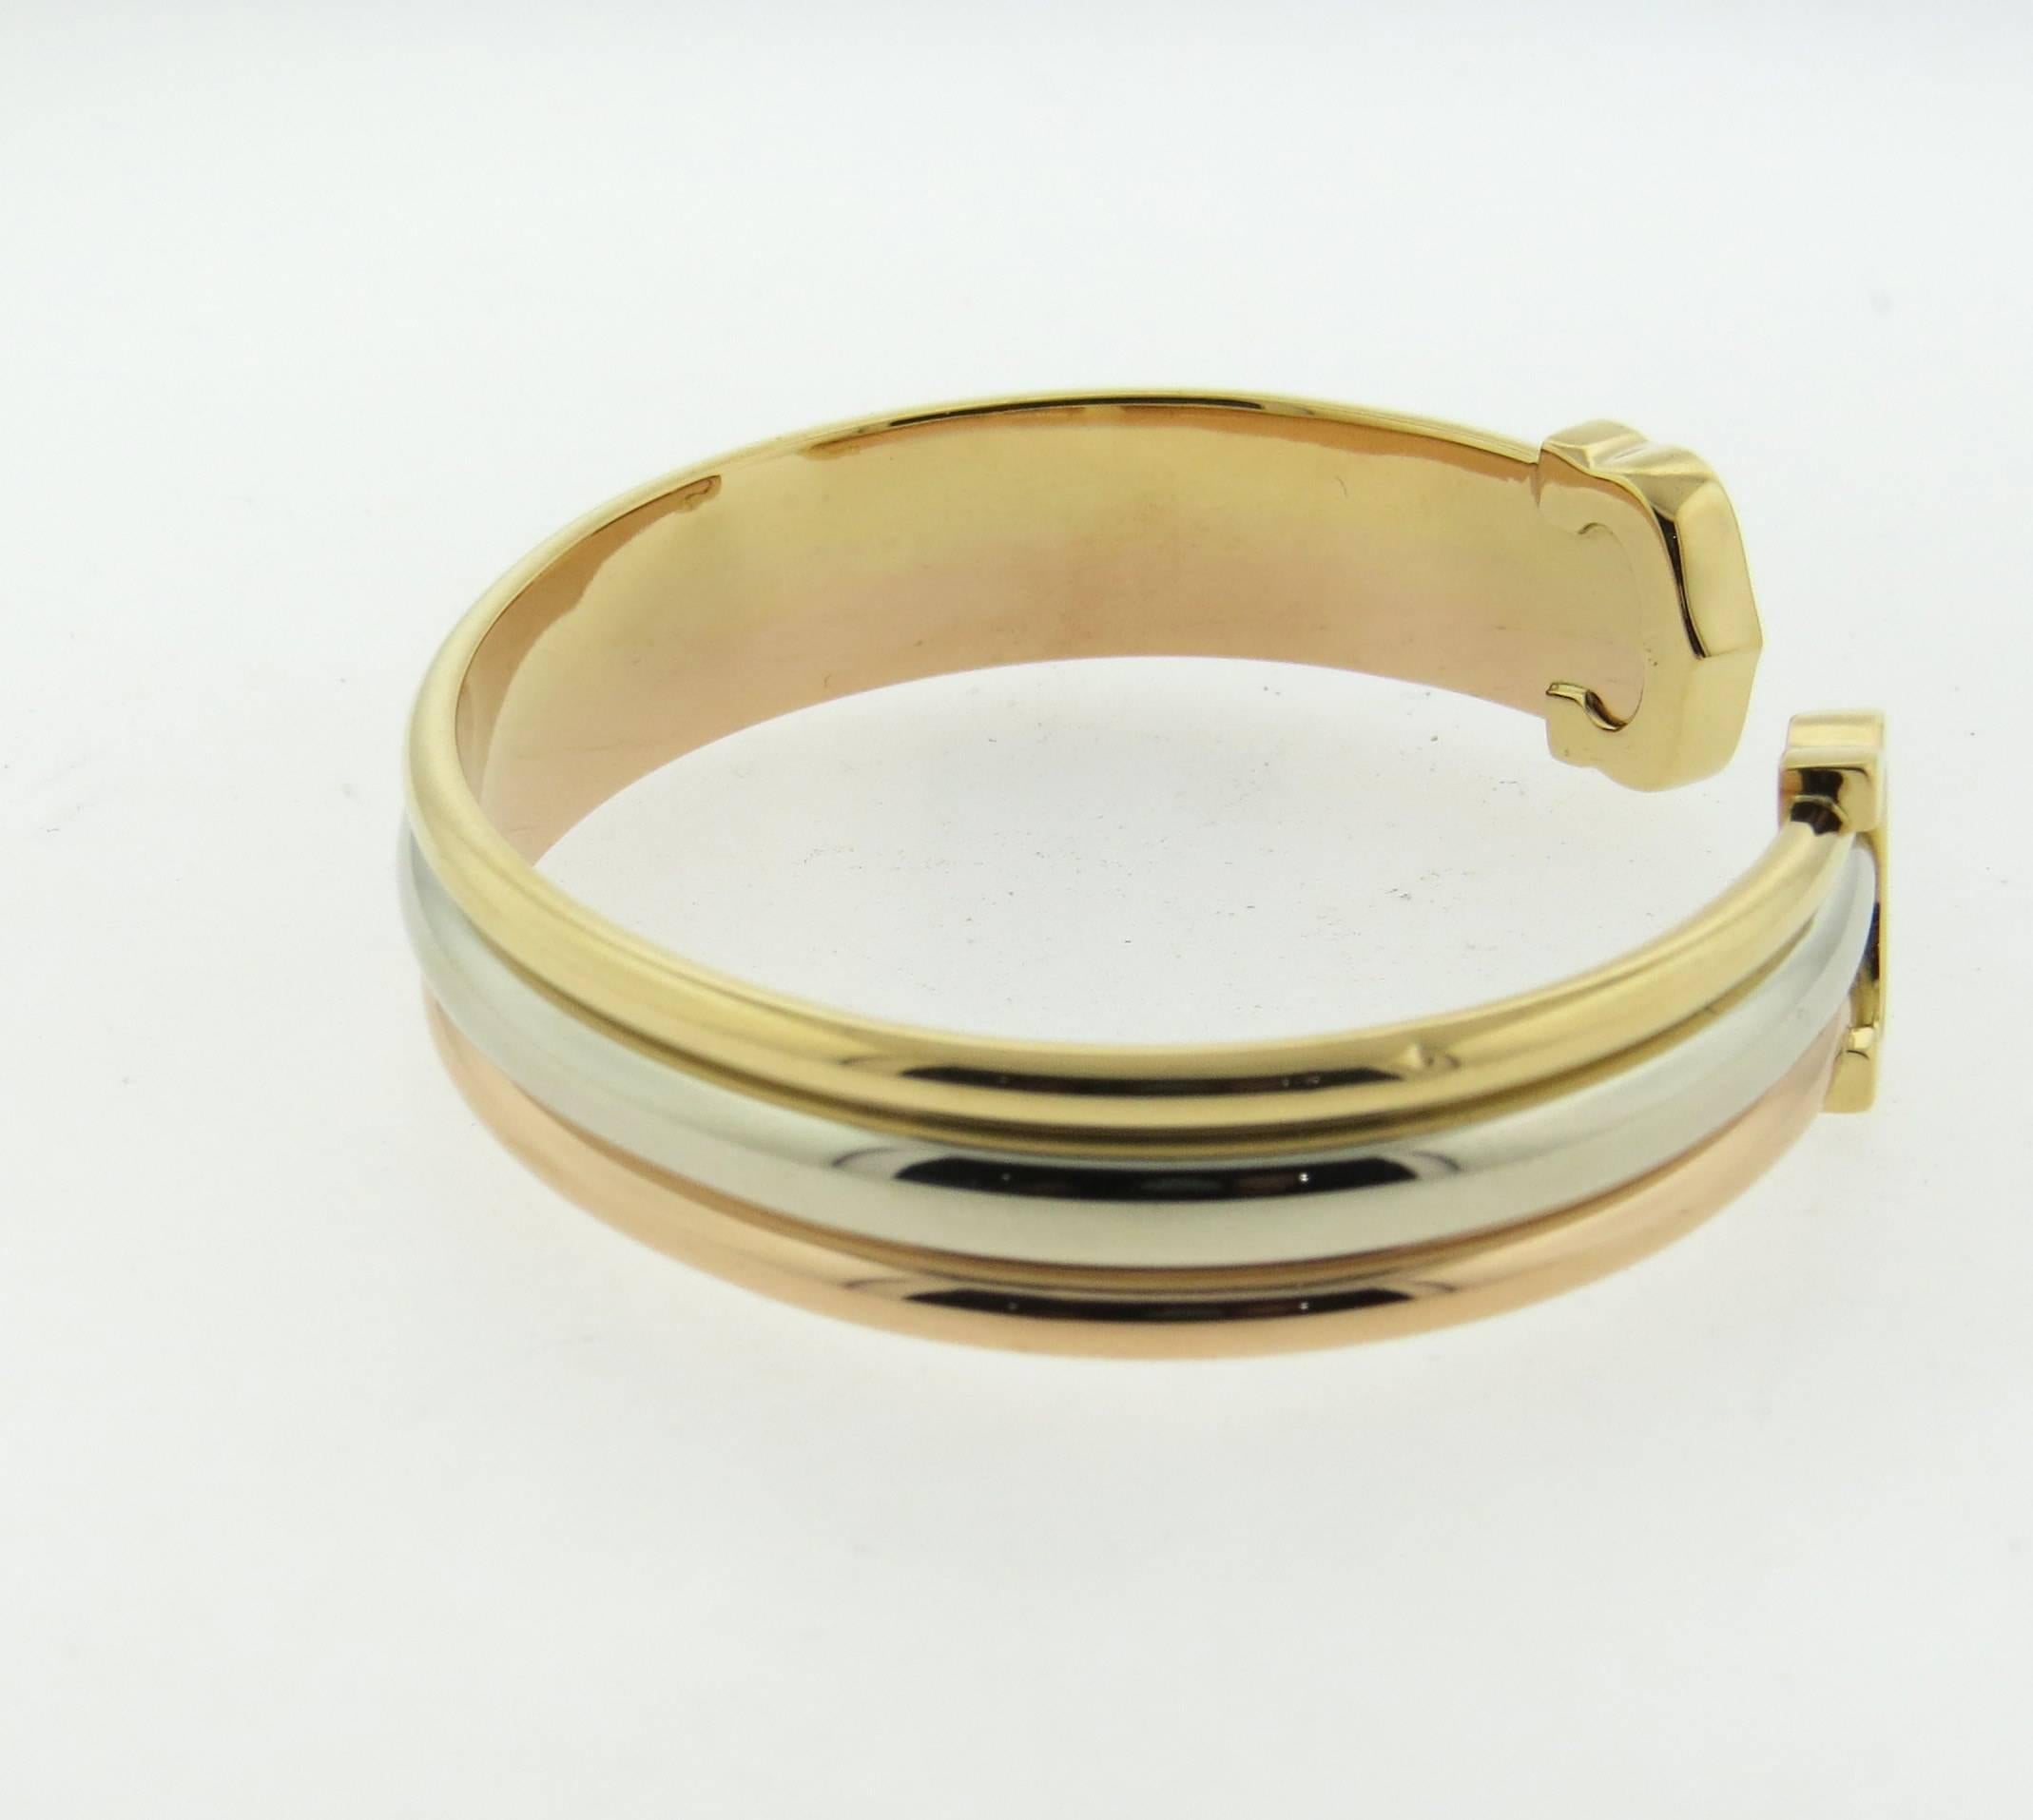 Classic Trinity 18k tri color gold open cuff bracelet, crafted by Cartier, featuring two C's. Bracelet will fit up to 7